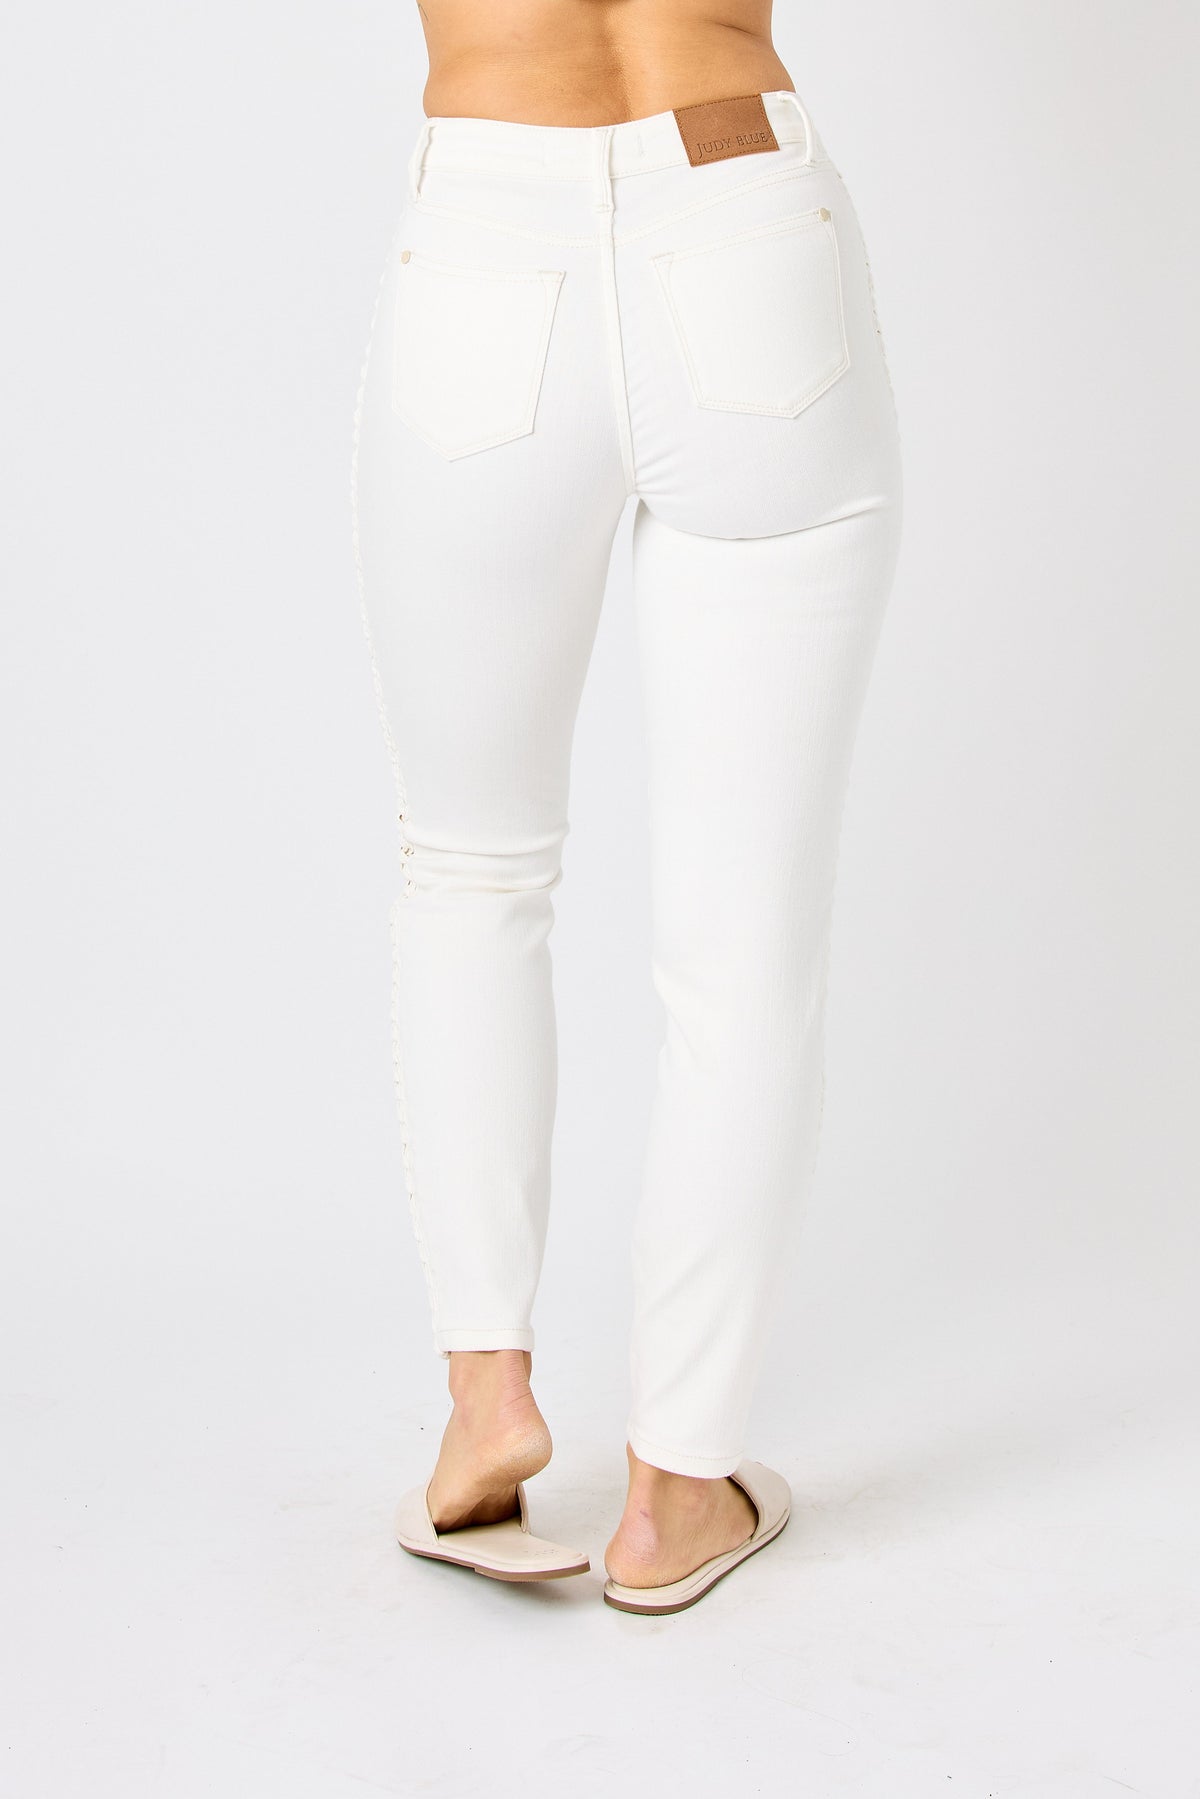 judy blue mid rise braided detail relaxed jeans in white-back view